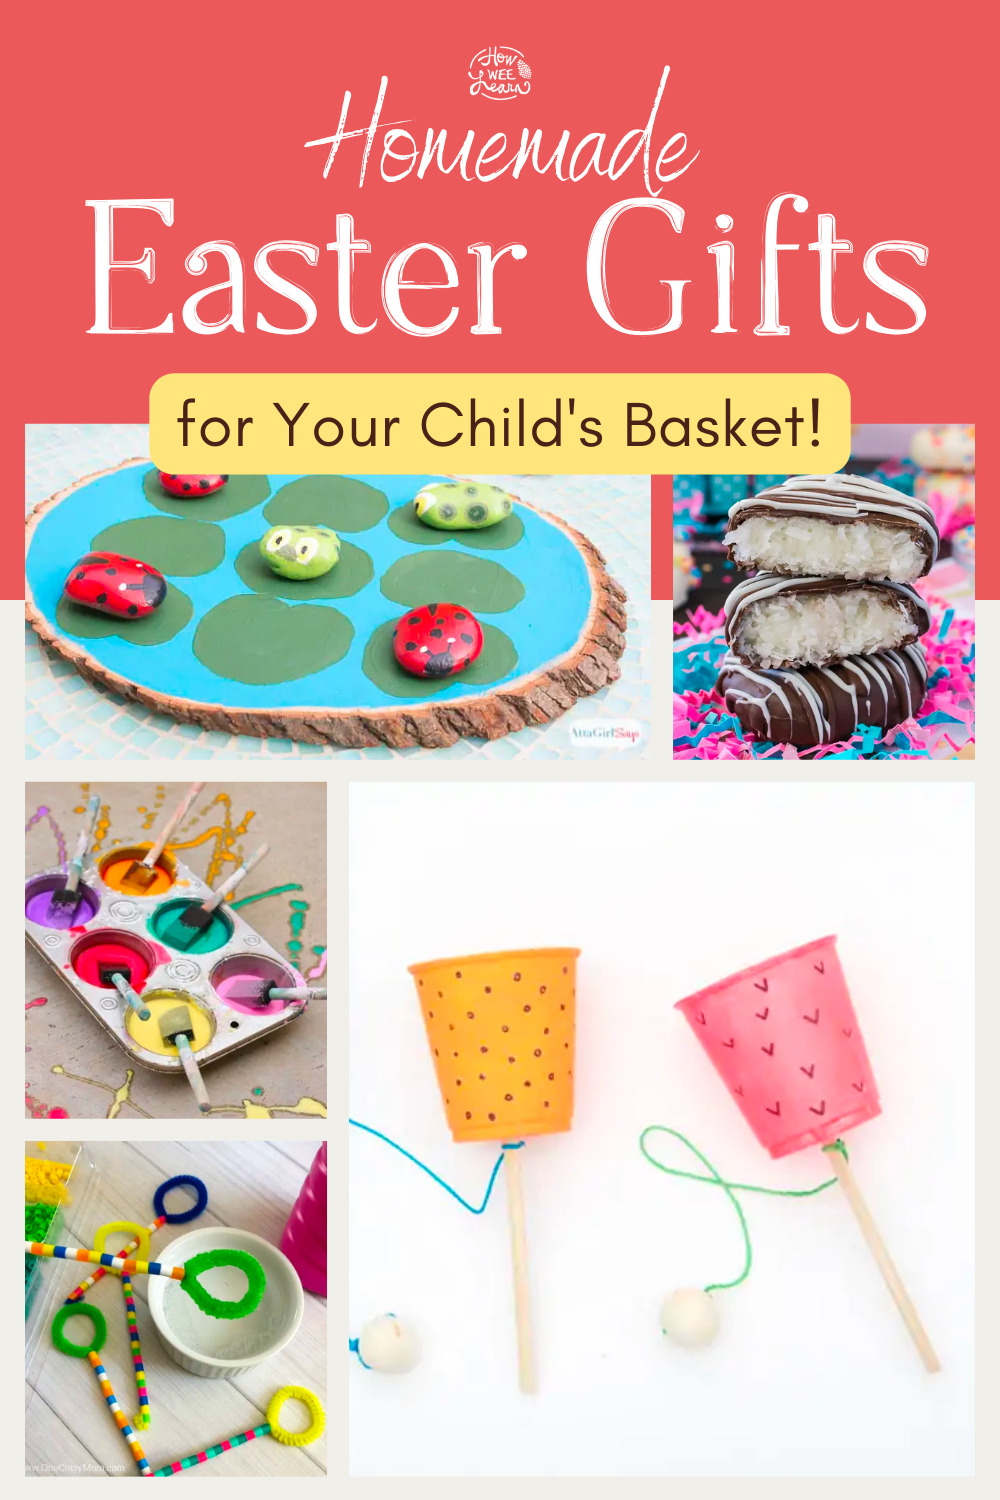 Homemade Easter Gifts for Your Child's Basket